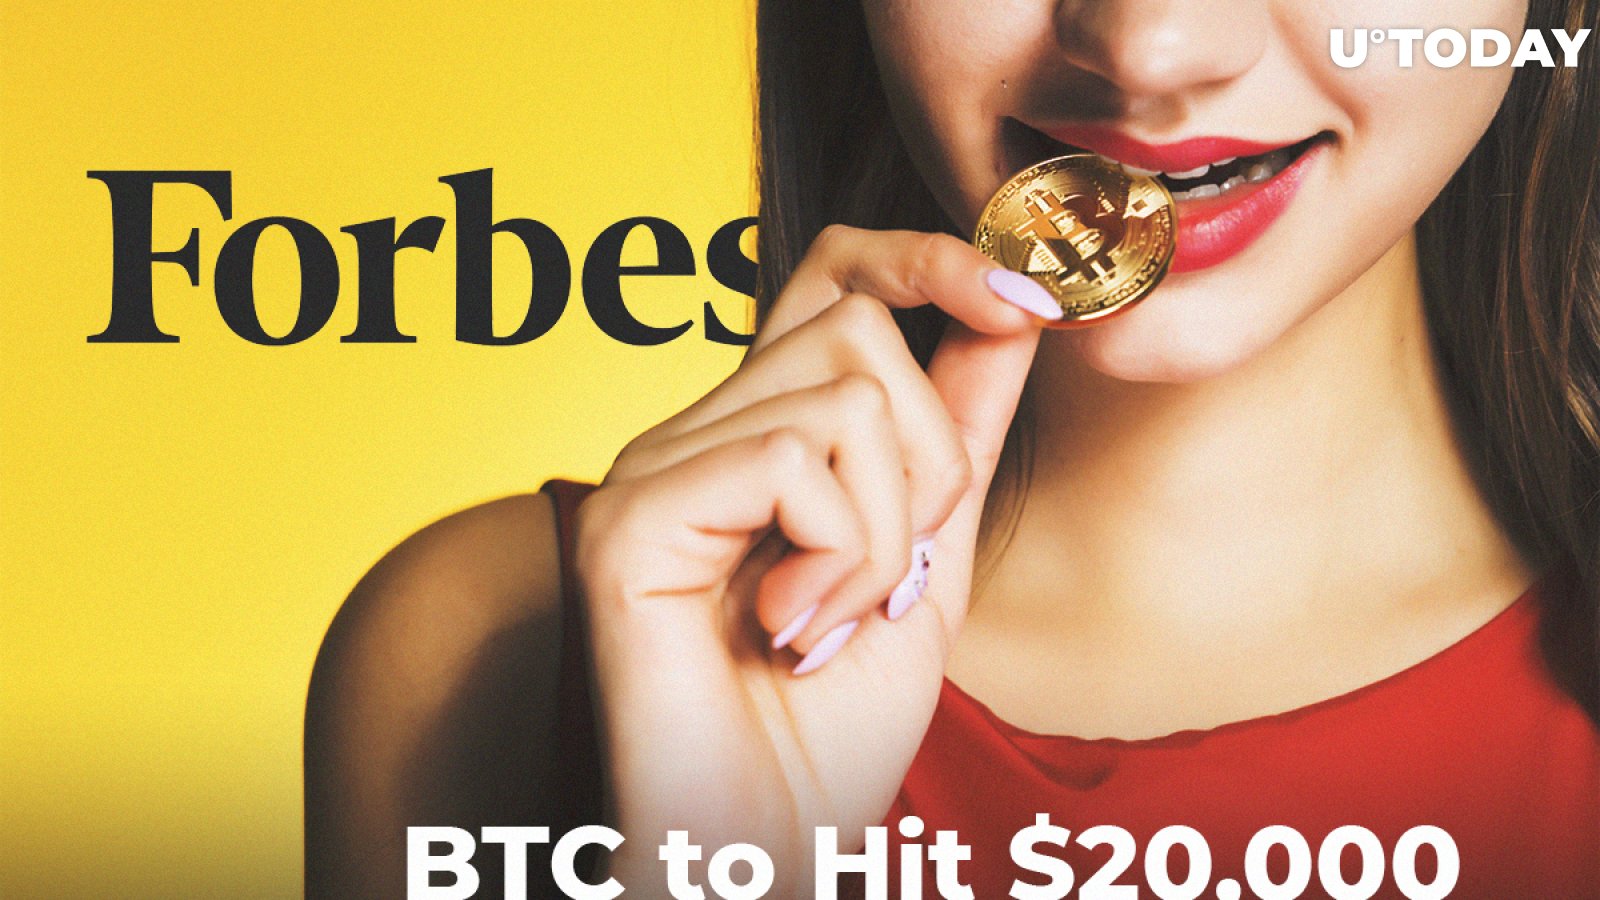 Bitcoin Price Pushed to $7,800 by BTC Whales. Forbes: BTC to Hit $20,000 in 2020